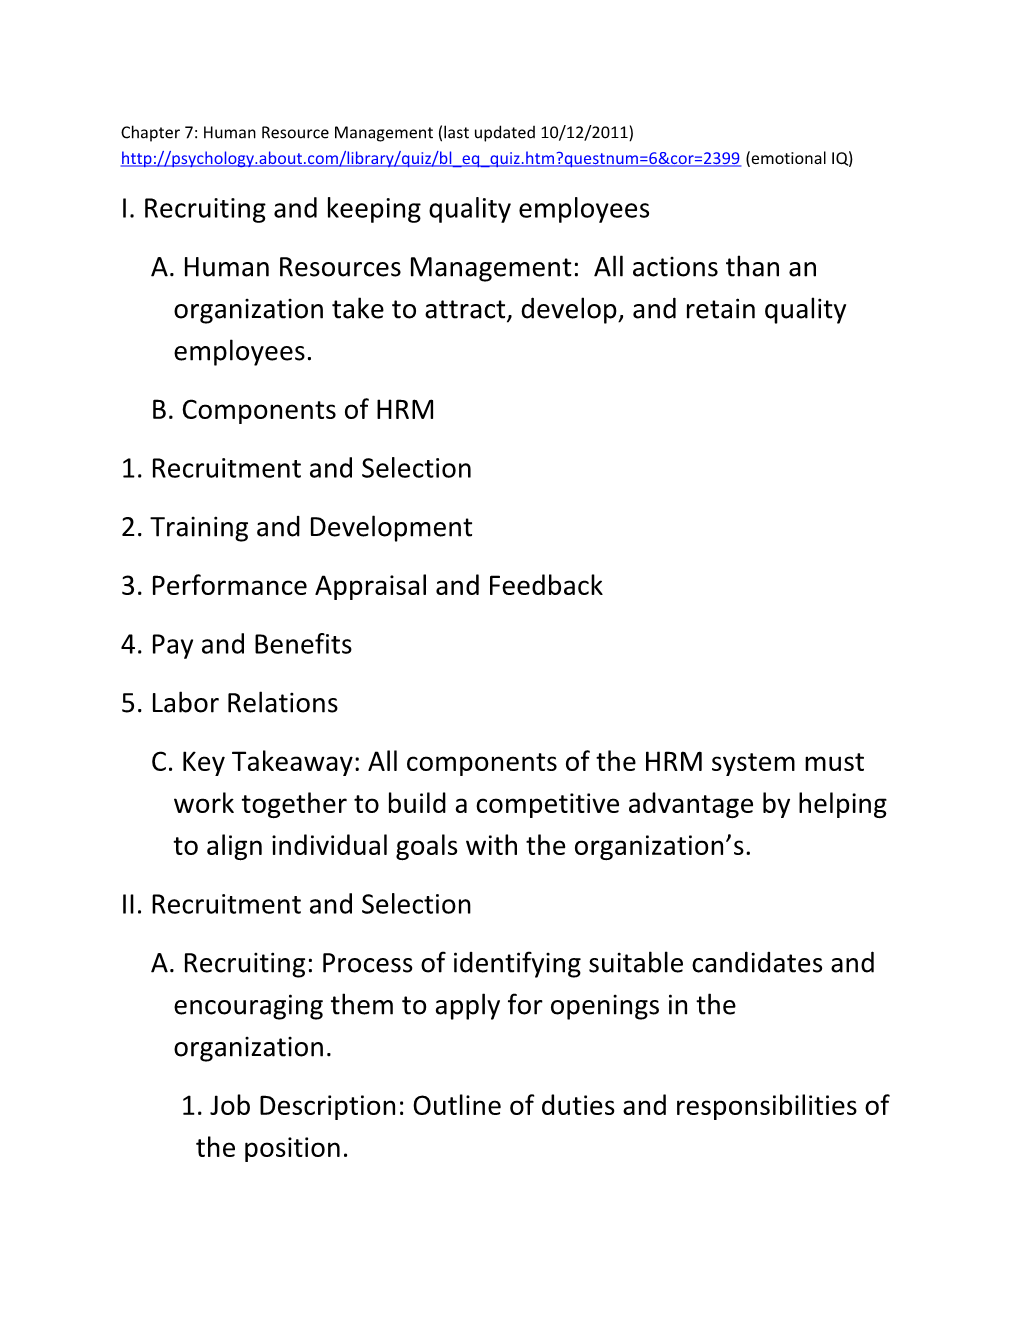 Chapter 7: Human Resource Management (Last Updated 10/12/2011) (Emotional IQ)